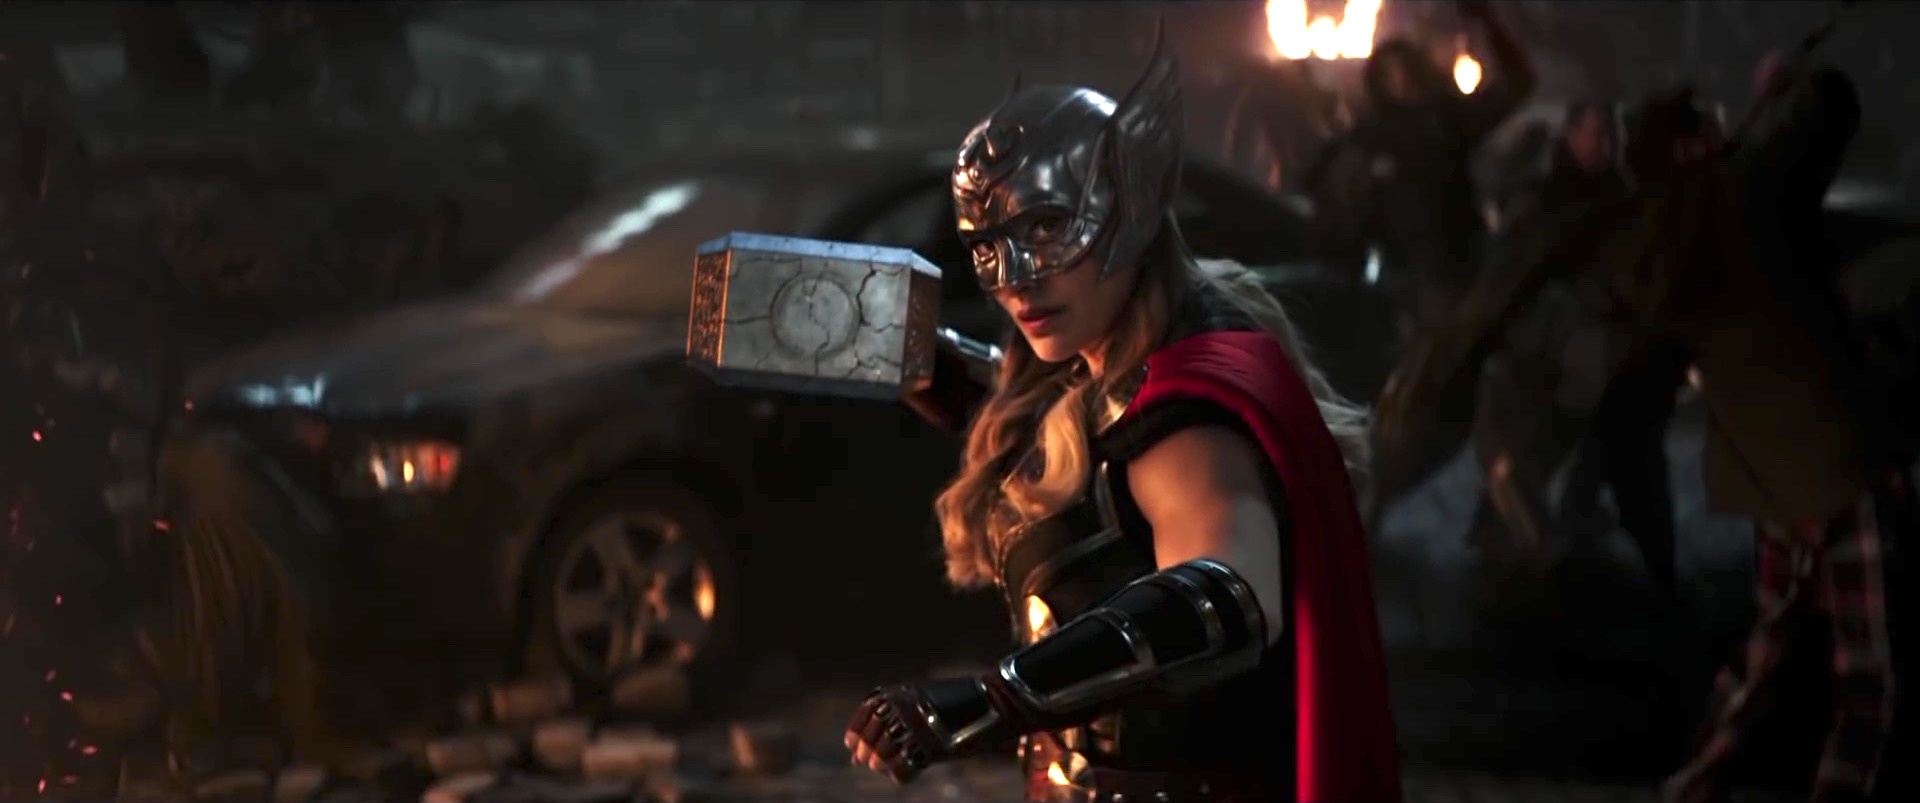 Natalie Portman as Jane Foster/Thor in Thor: Love and Thunder